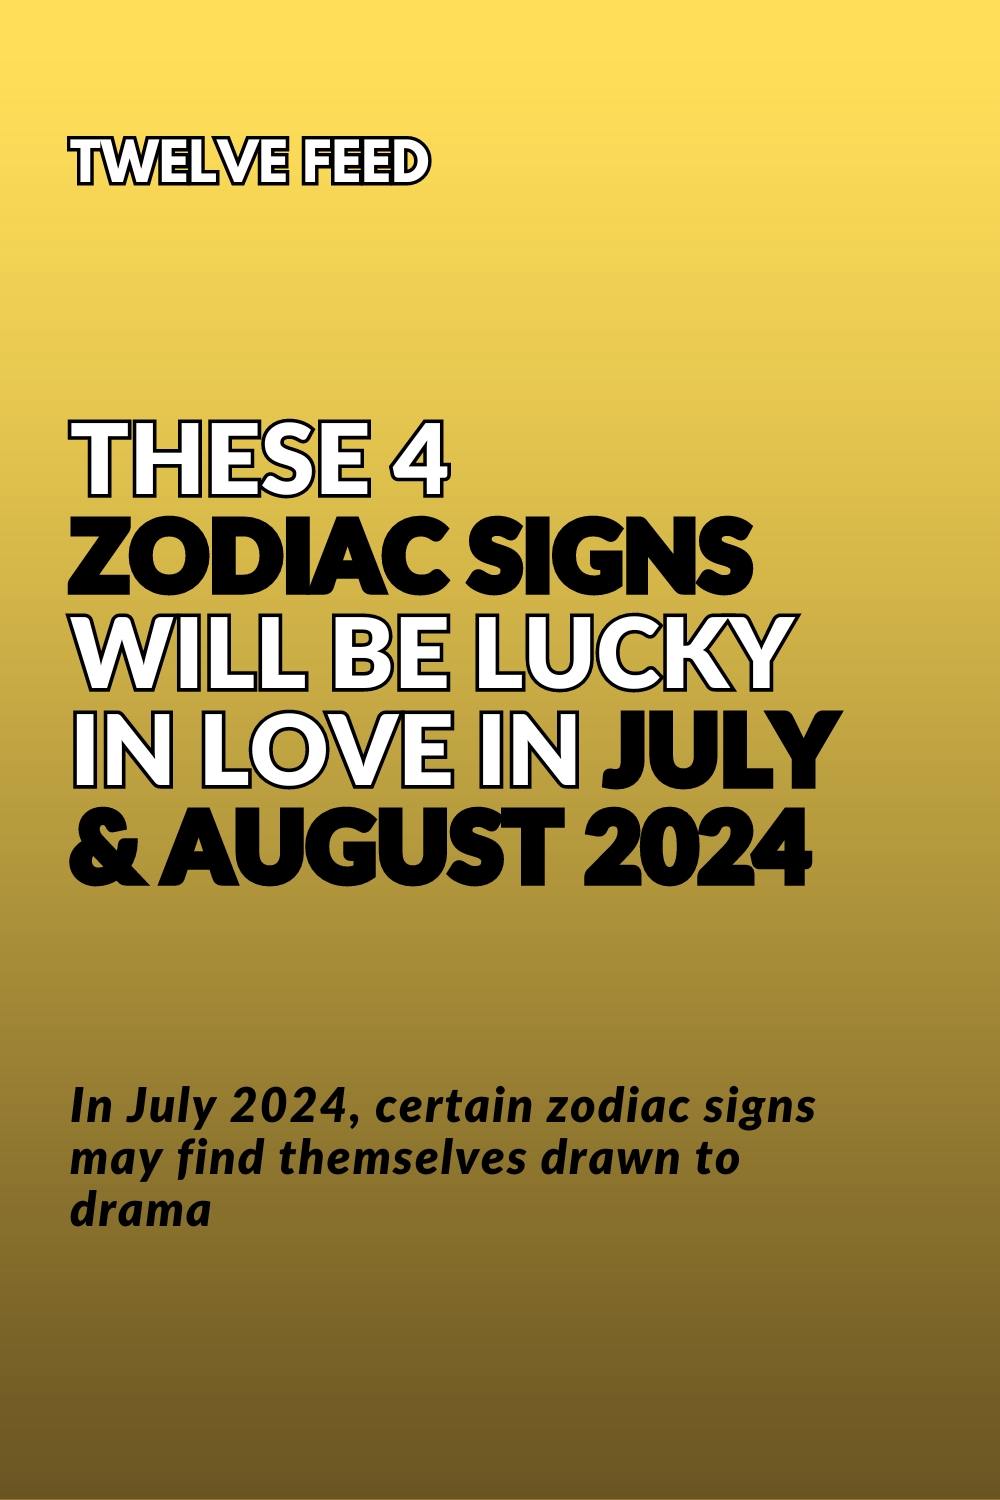 These 4 Zodiac Signs Will Be Lucky In Love In July & August 2024 